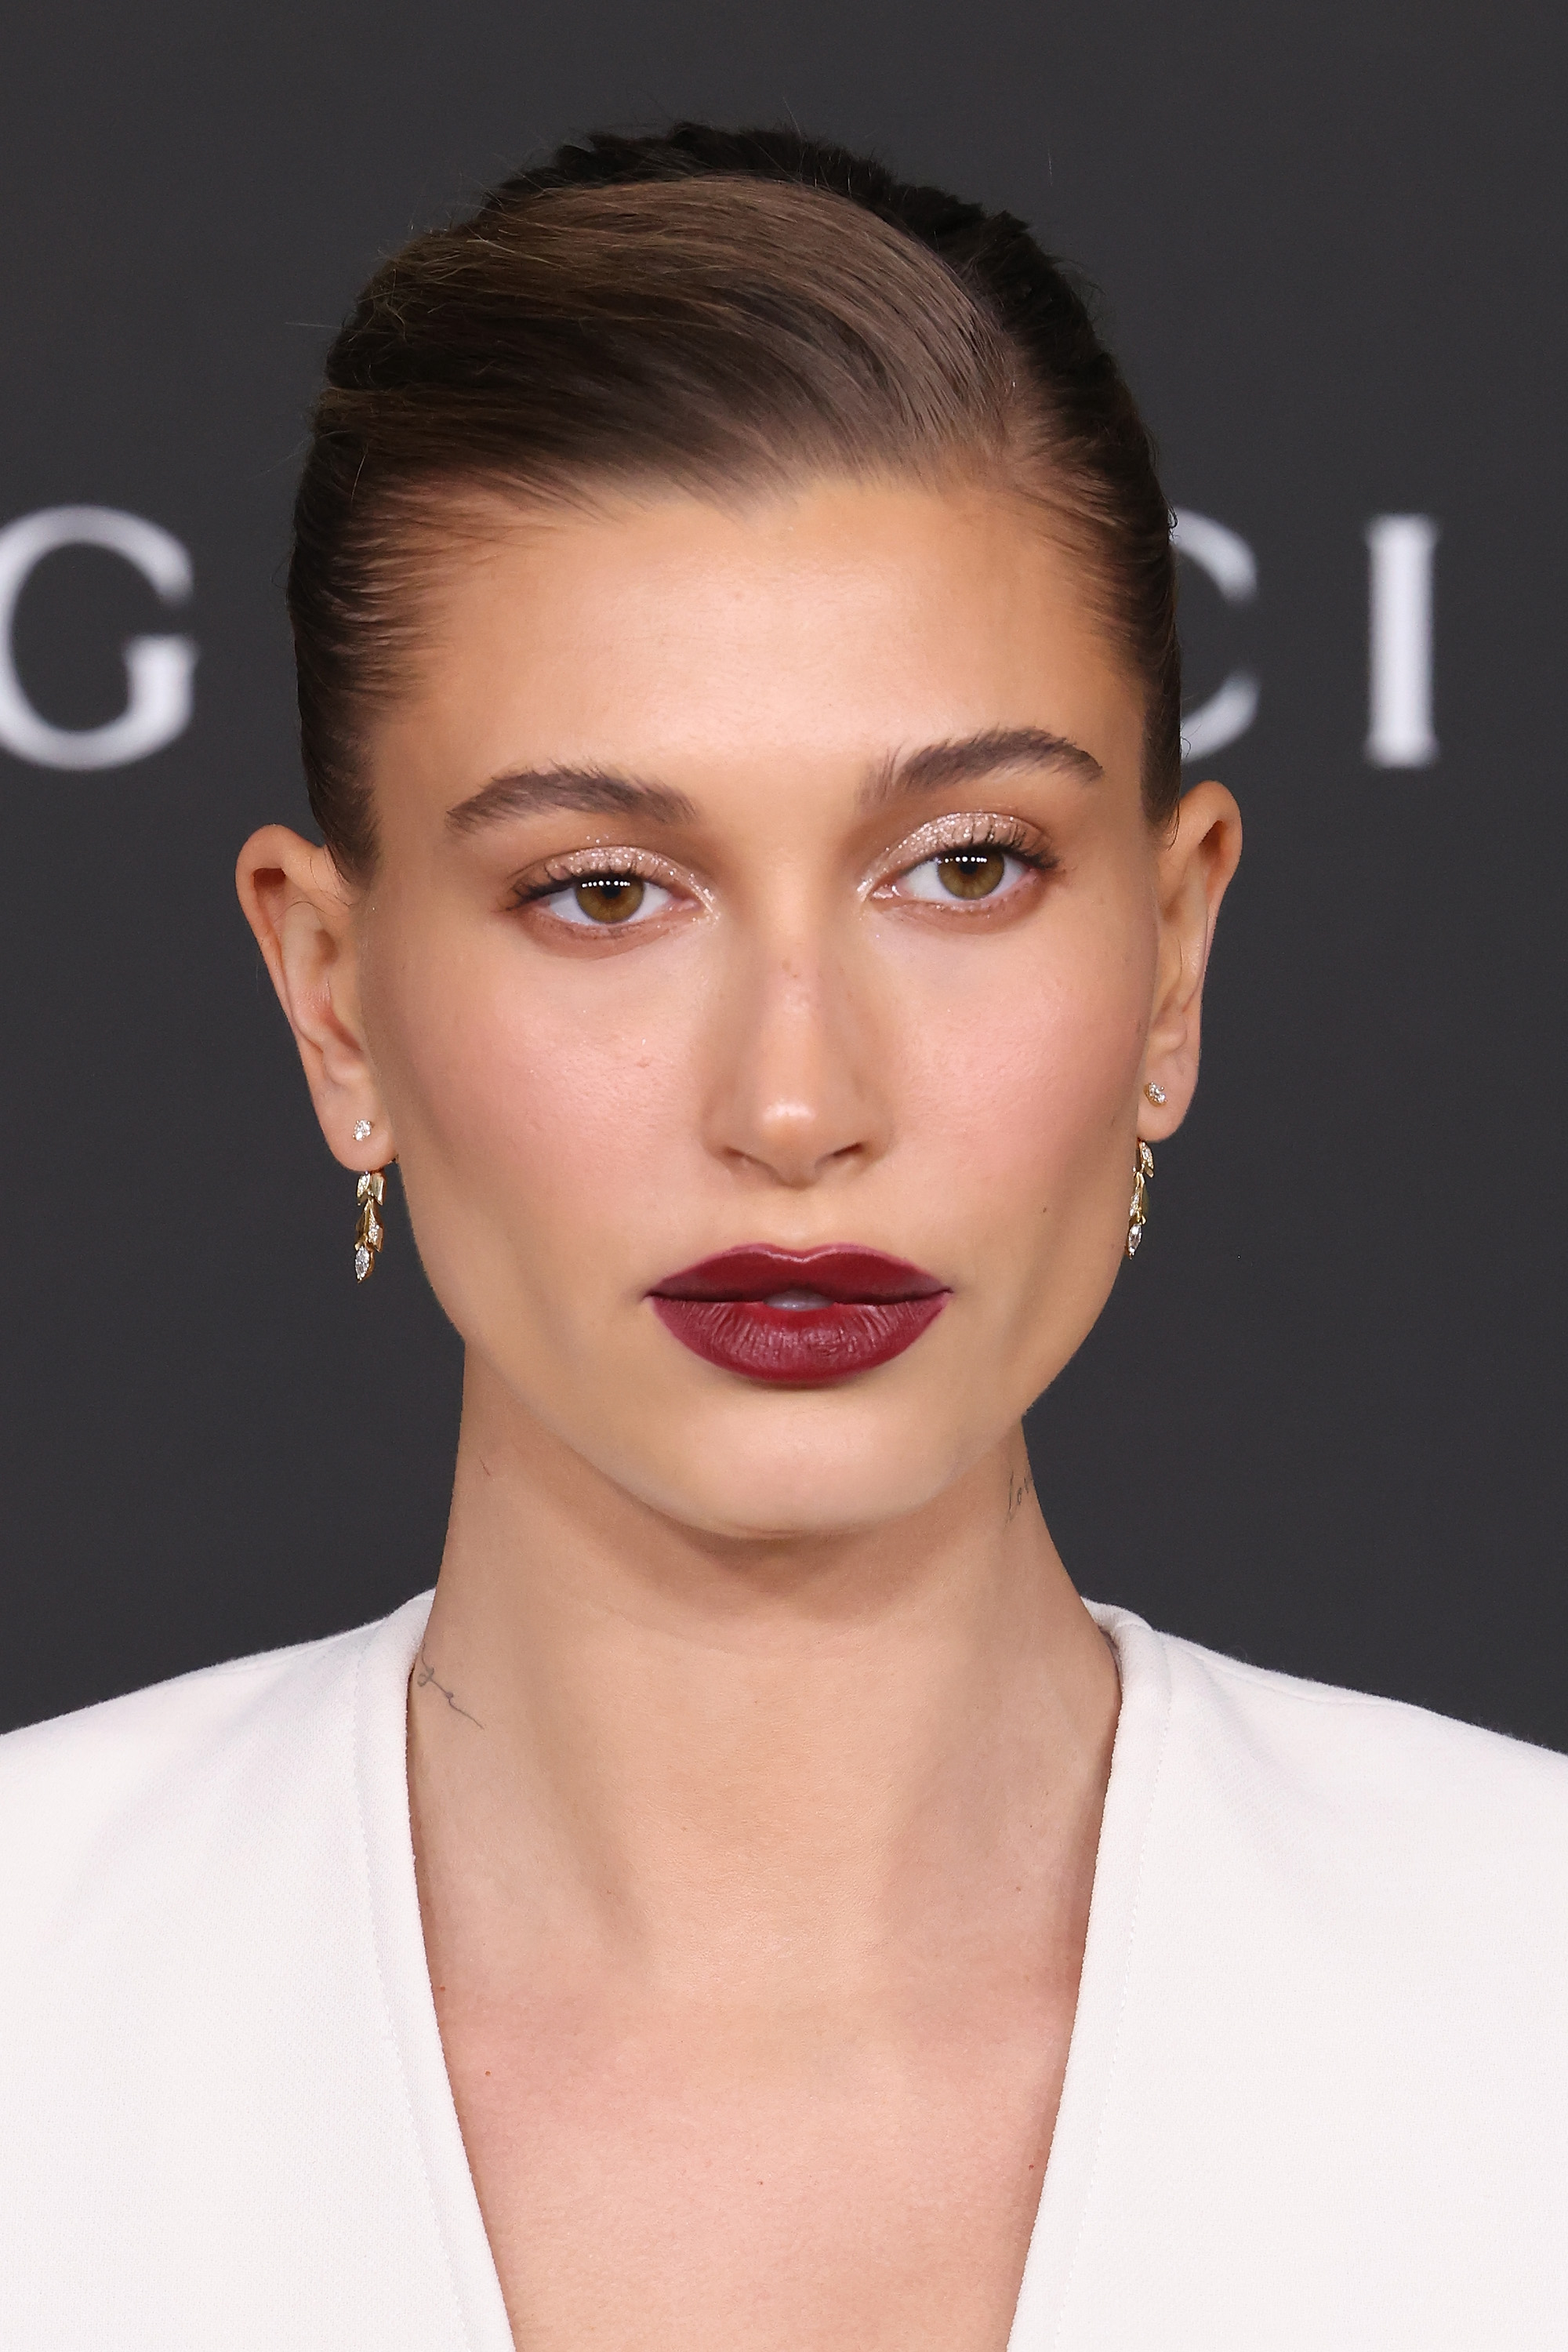 I Can't Stop Thinking About Hailey Bieber's LACMA Beauty Look